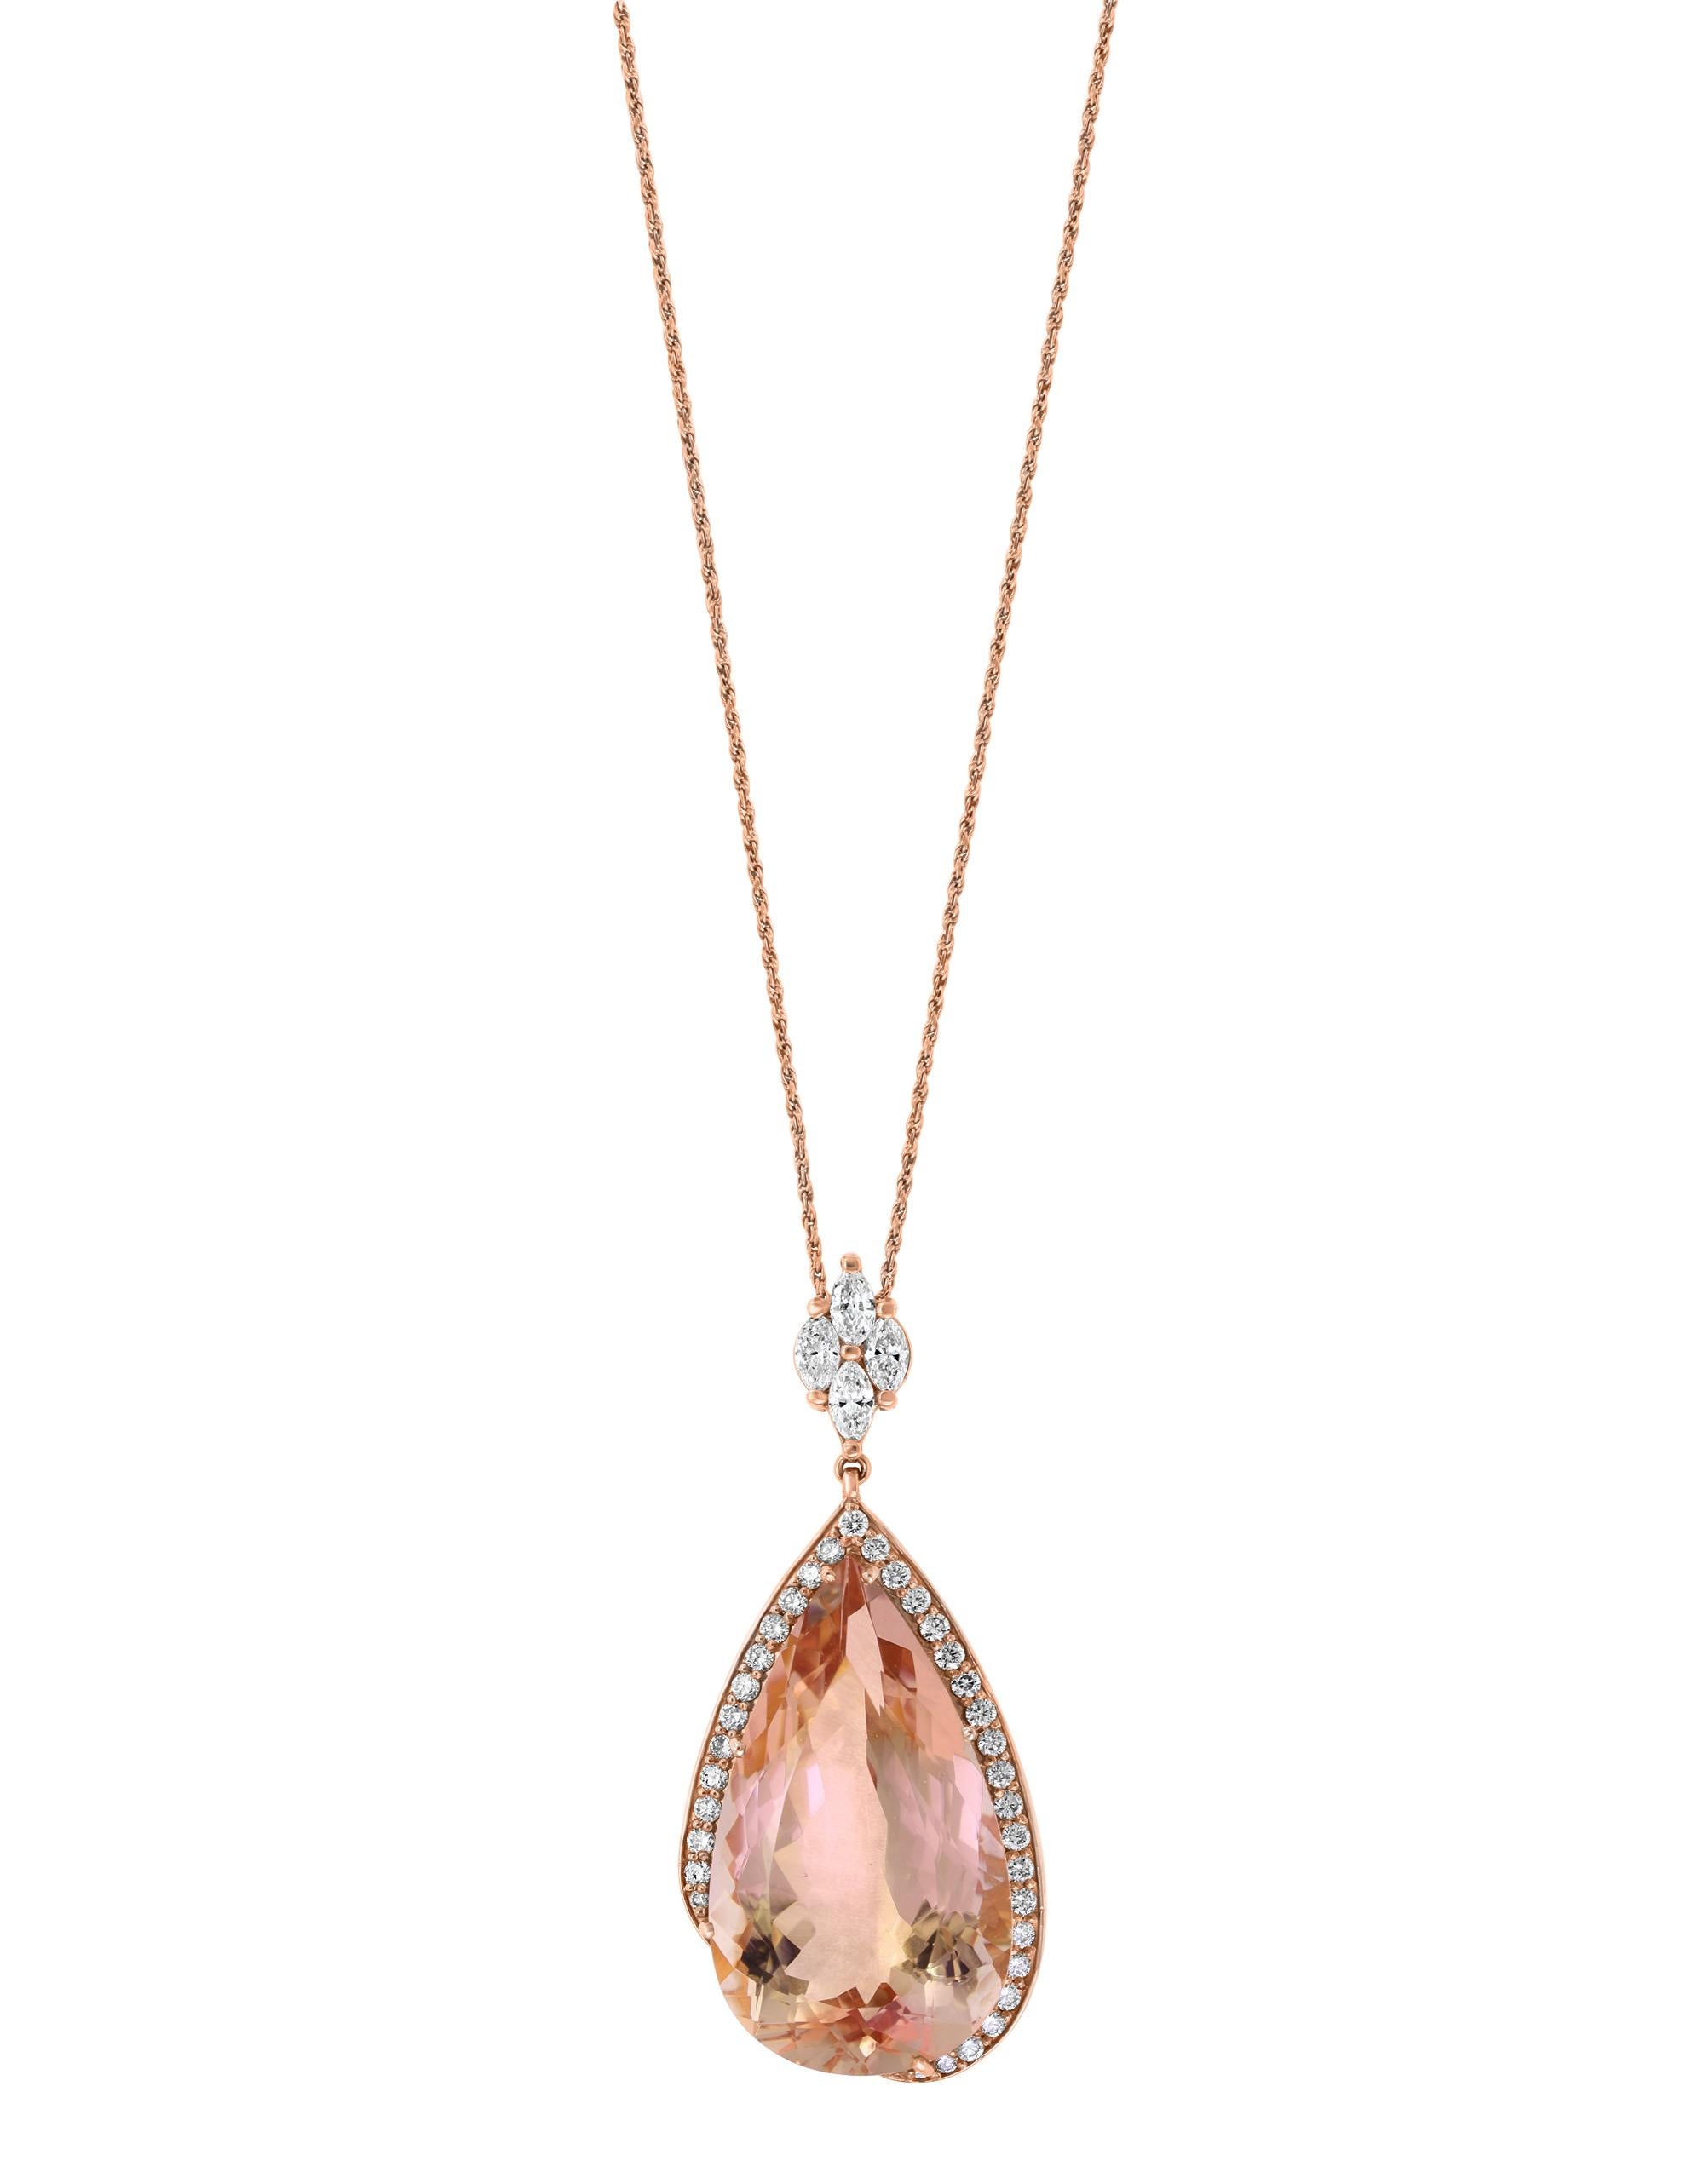 200 Carat Natural Morganite and Diamond Cocktail Earring and Pendant Set 18K PG In Excellent Condition For Sale In New York, NY